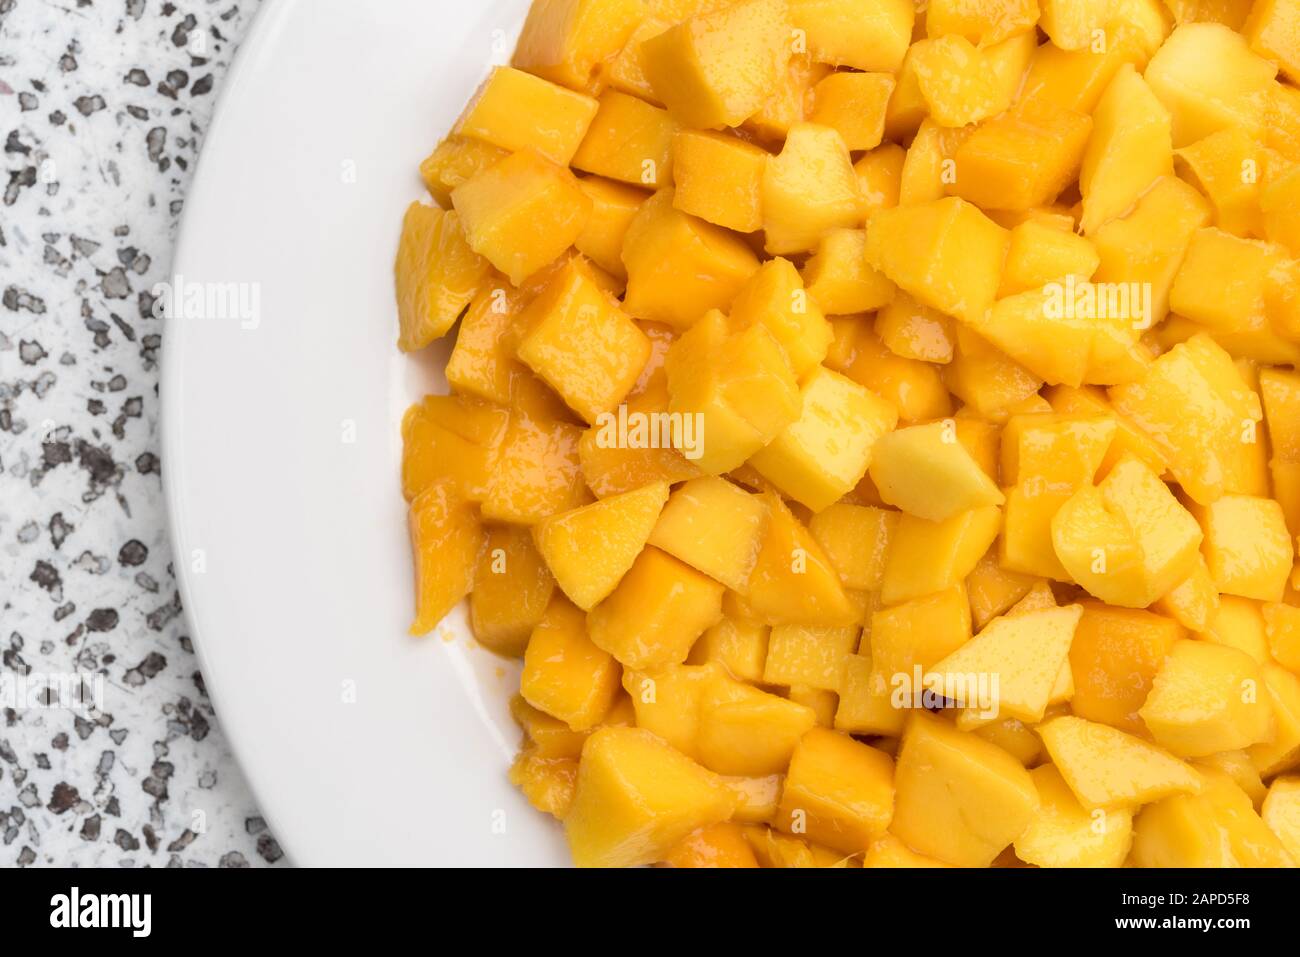 Mango chunks on plate. A close-up. Healthy natural food. Pieces of juicy yellow fruits. Stock Photo